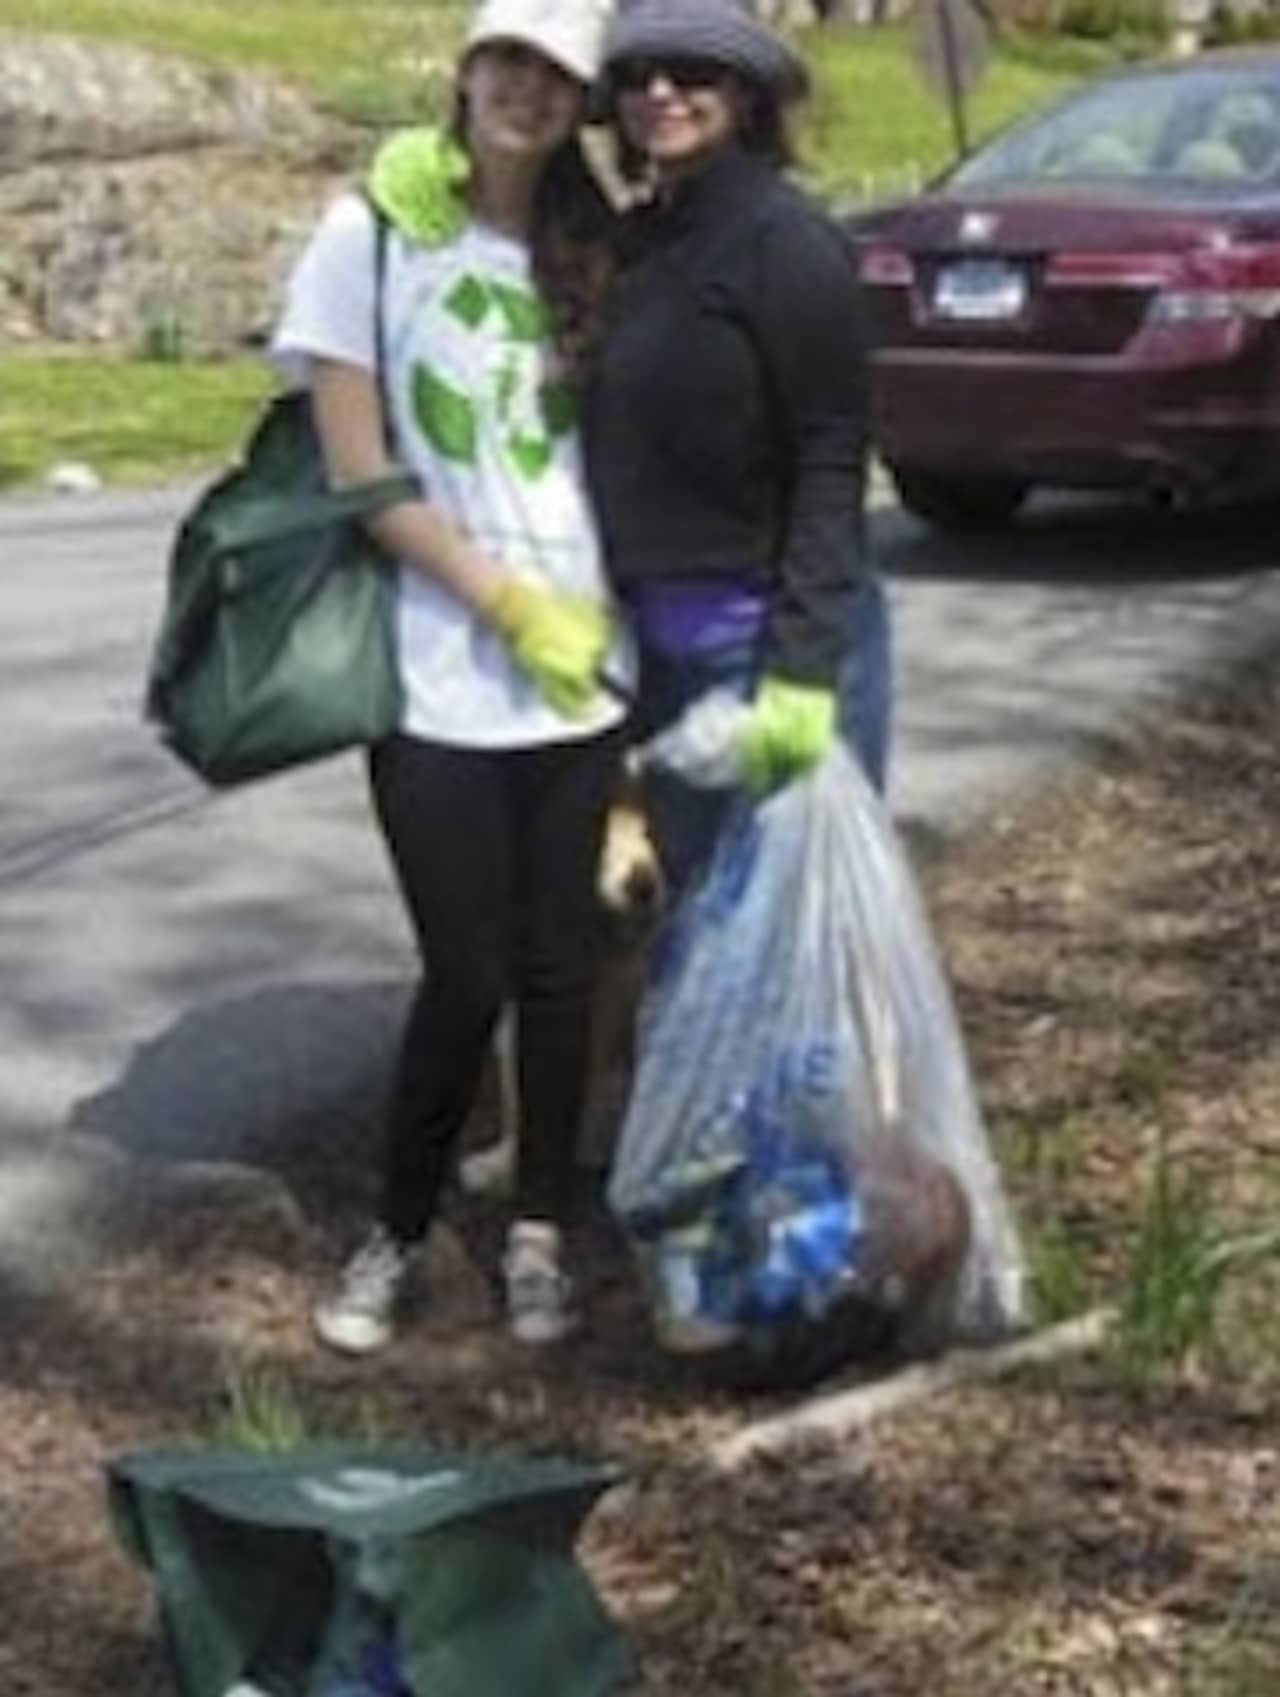 Closter will have its annual town clean-up April 2.